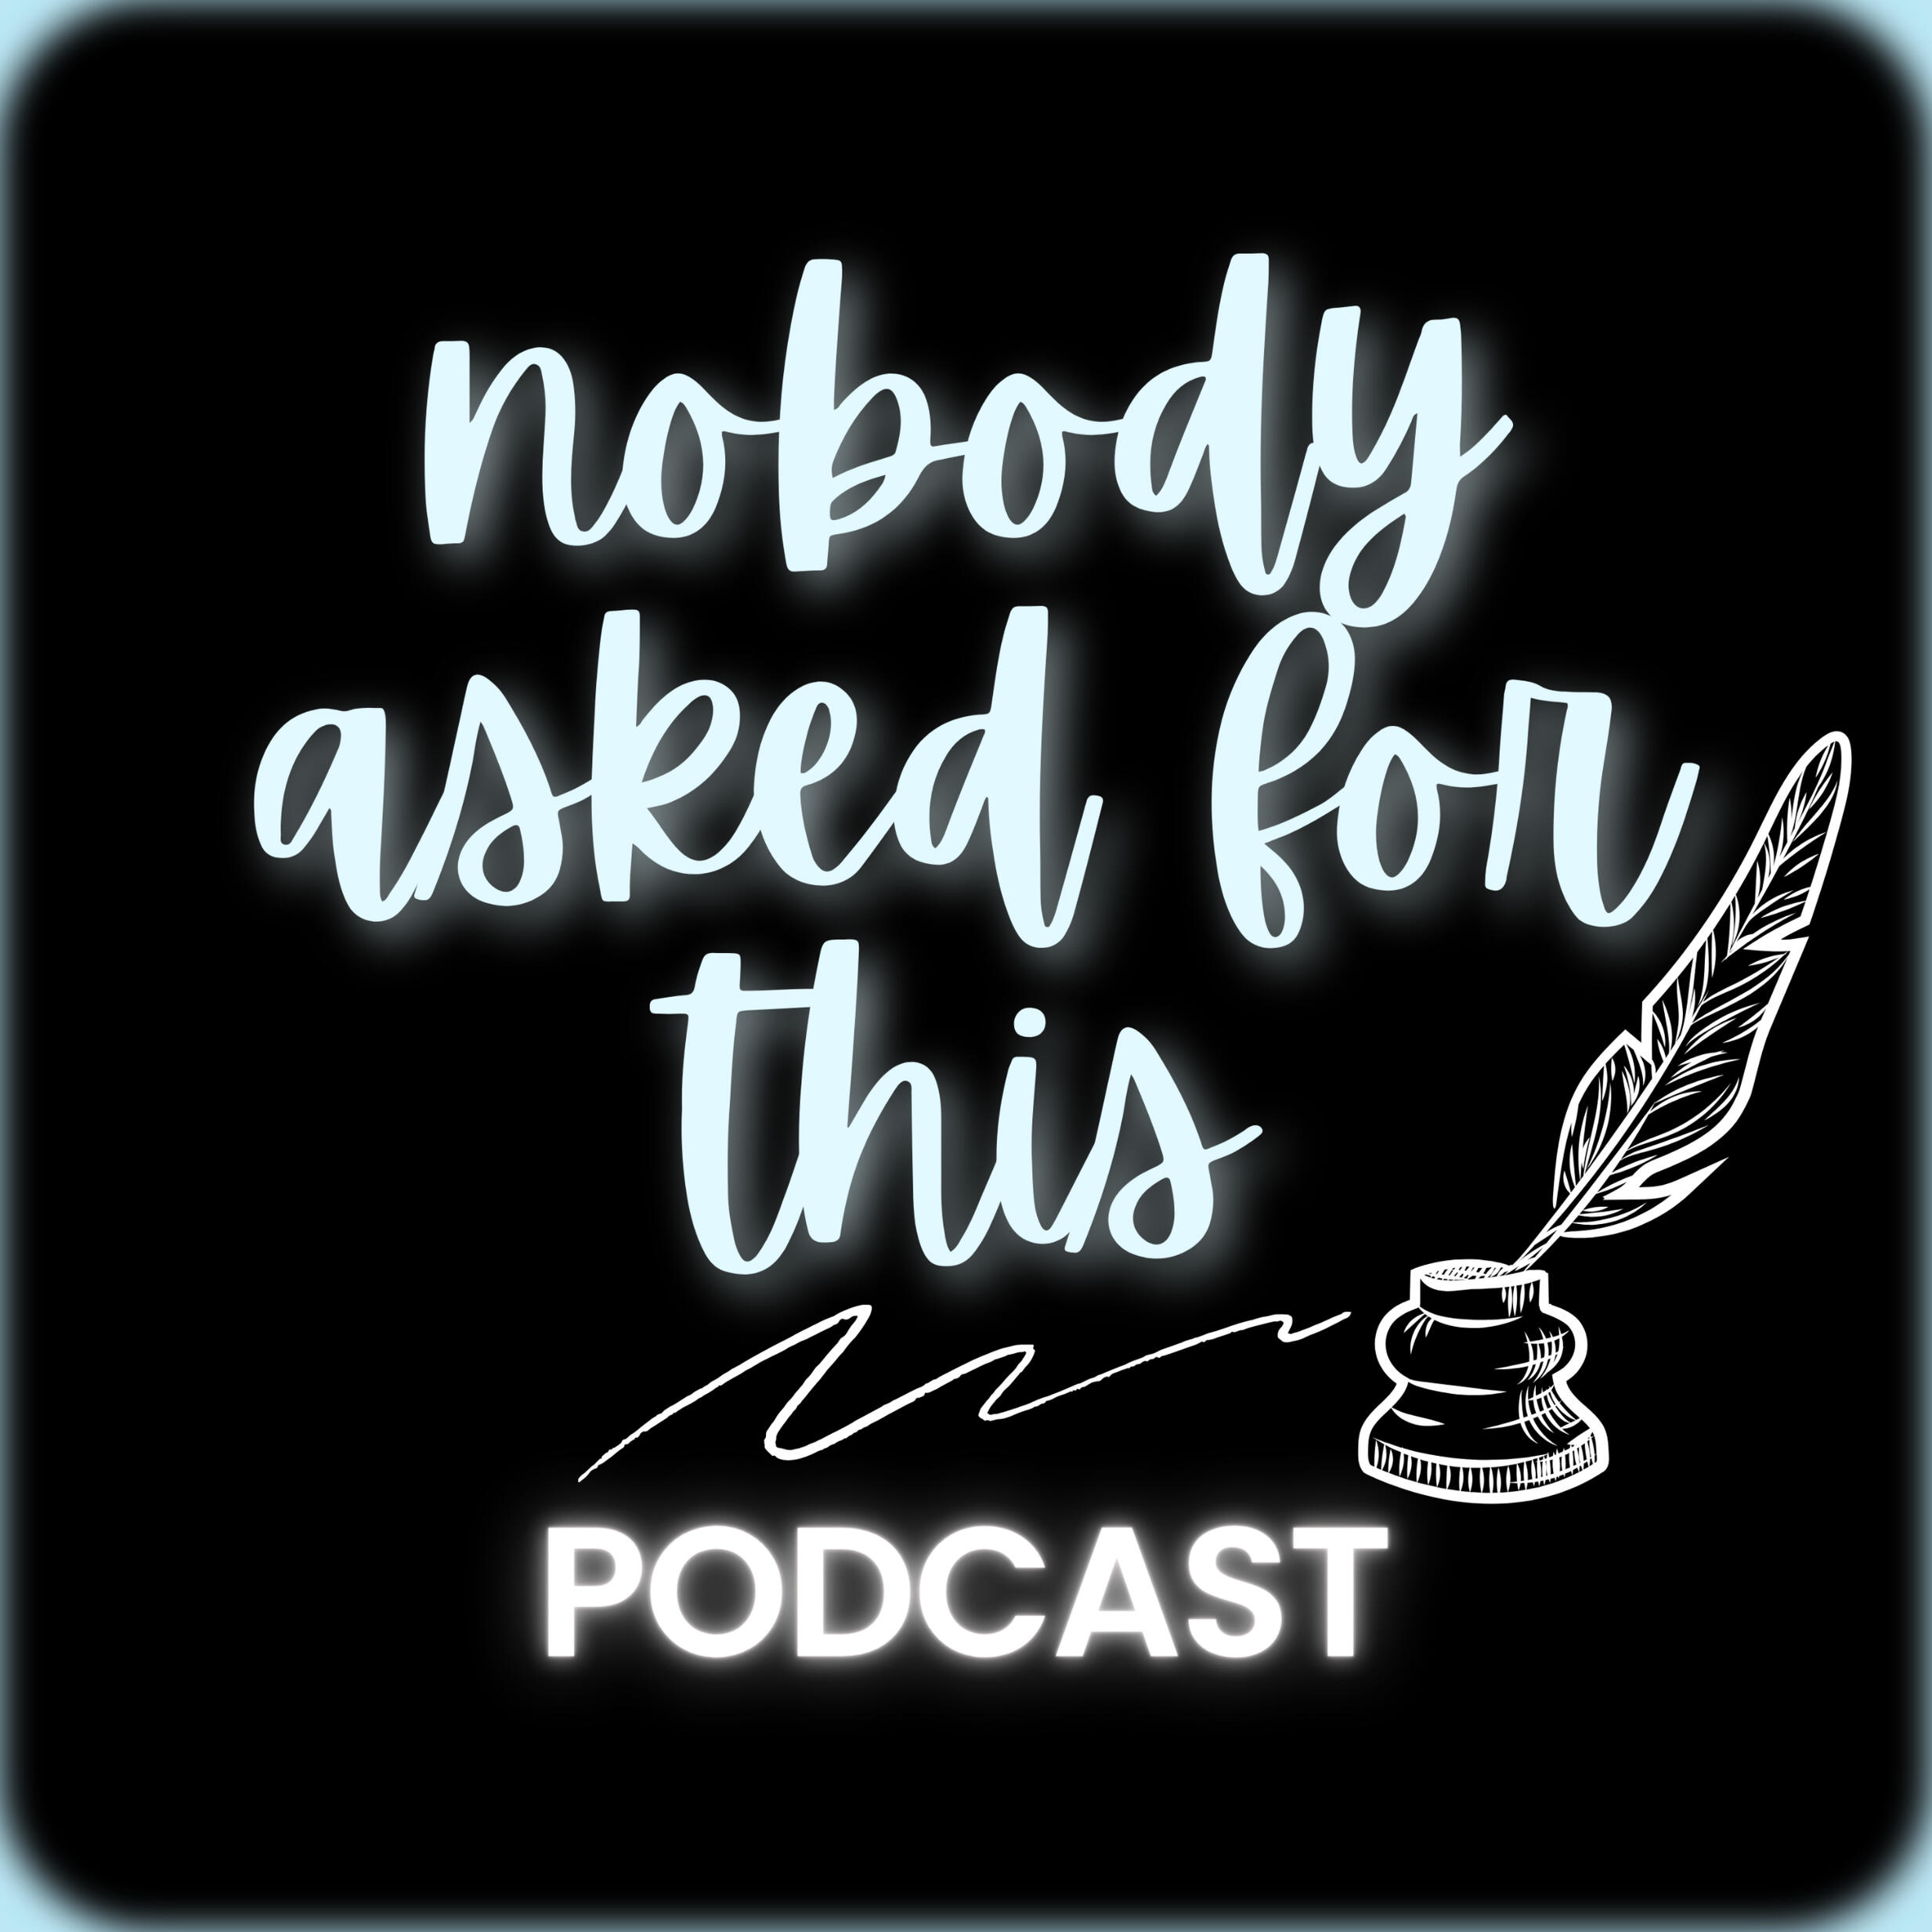 the logo for "nobody asked for this podcast," featuring the title with a quill pen inside an ink pot, with pen squiggles beside it.